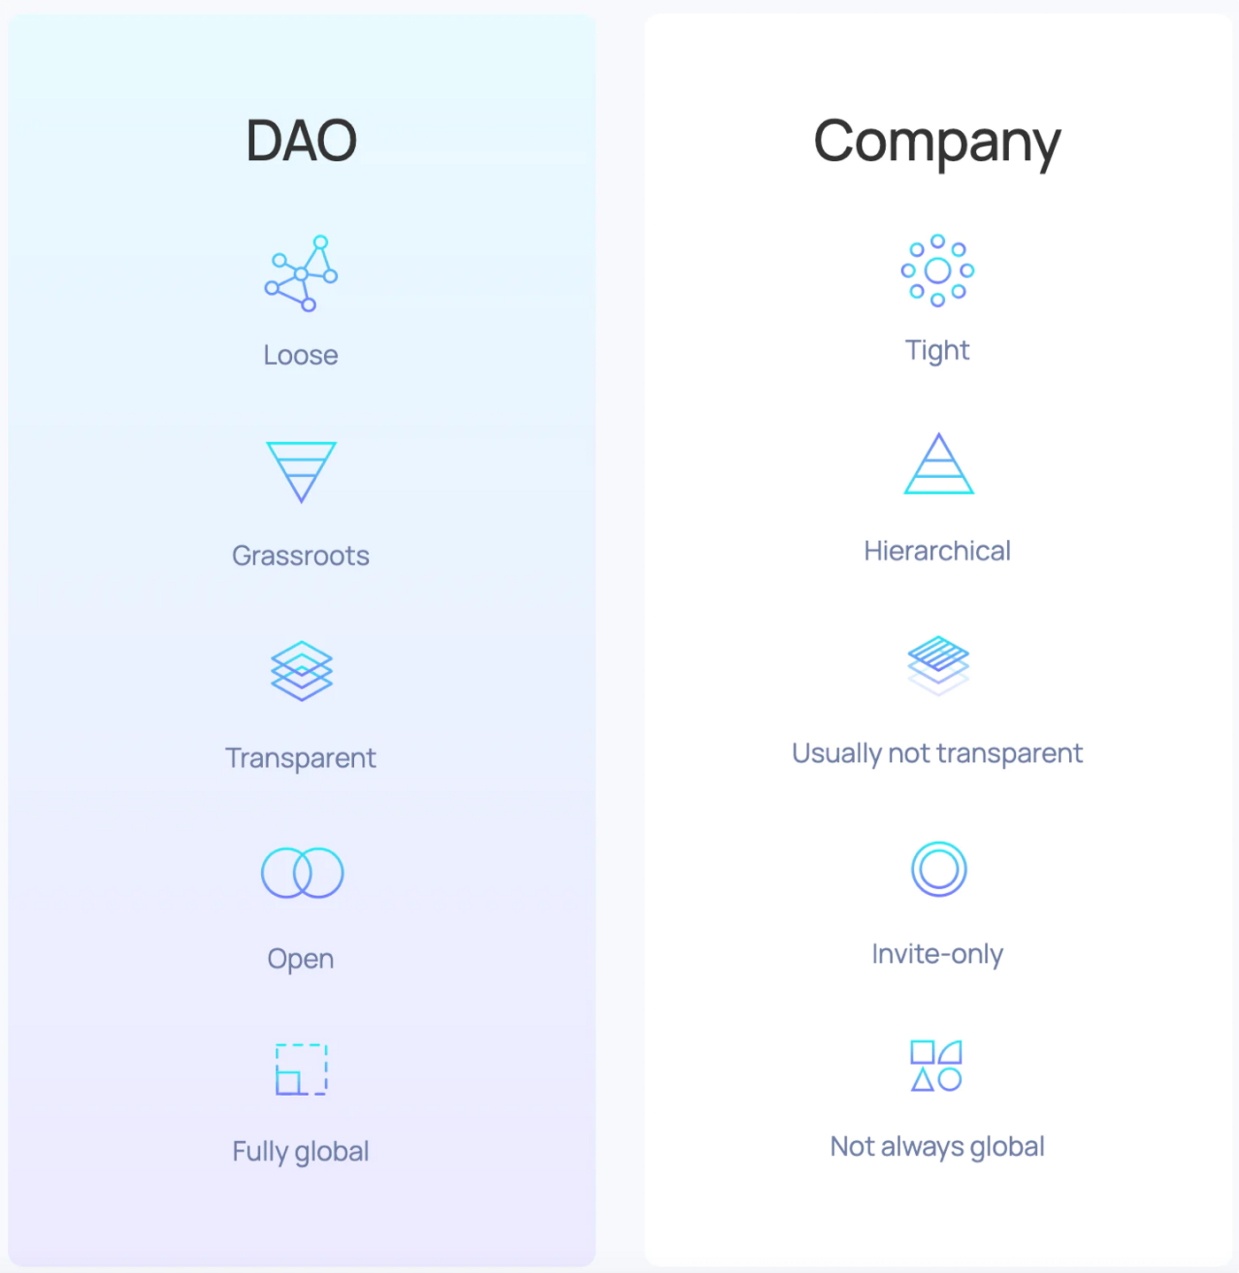 Infographic comparing a DAO to a Company by Aragon.org